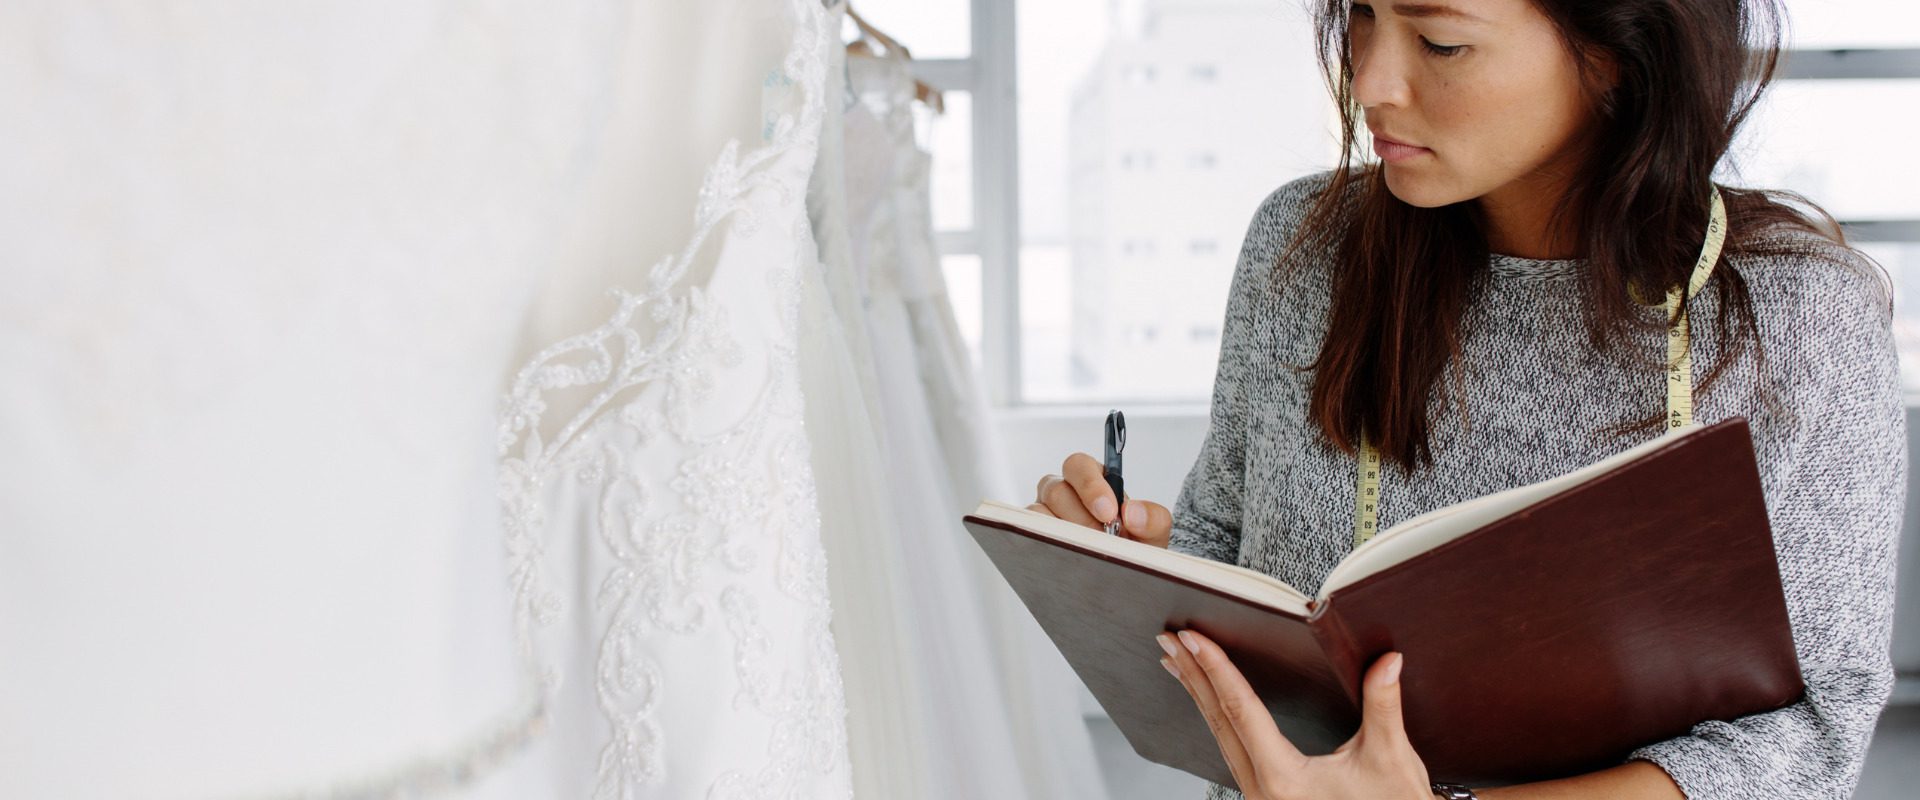 bridal store employee taking inventory in notebook